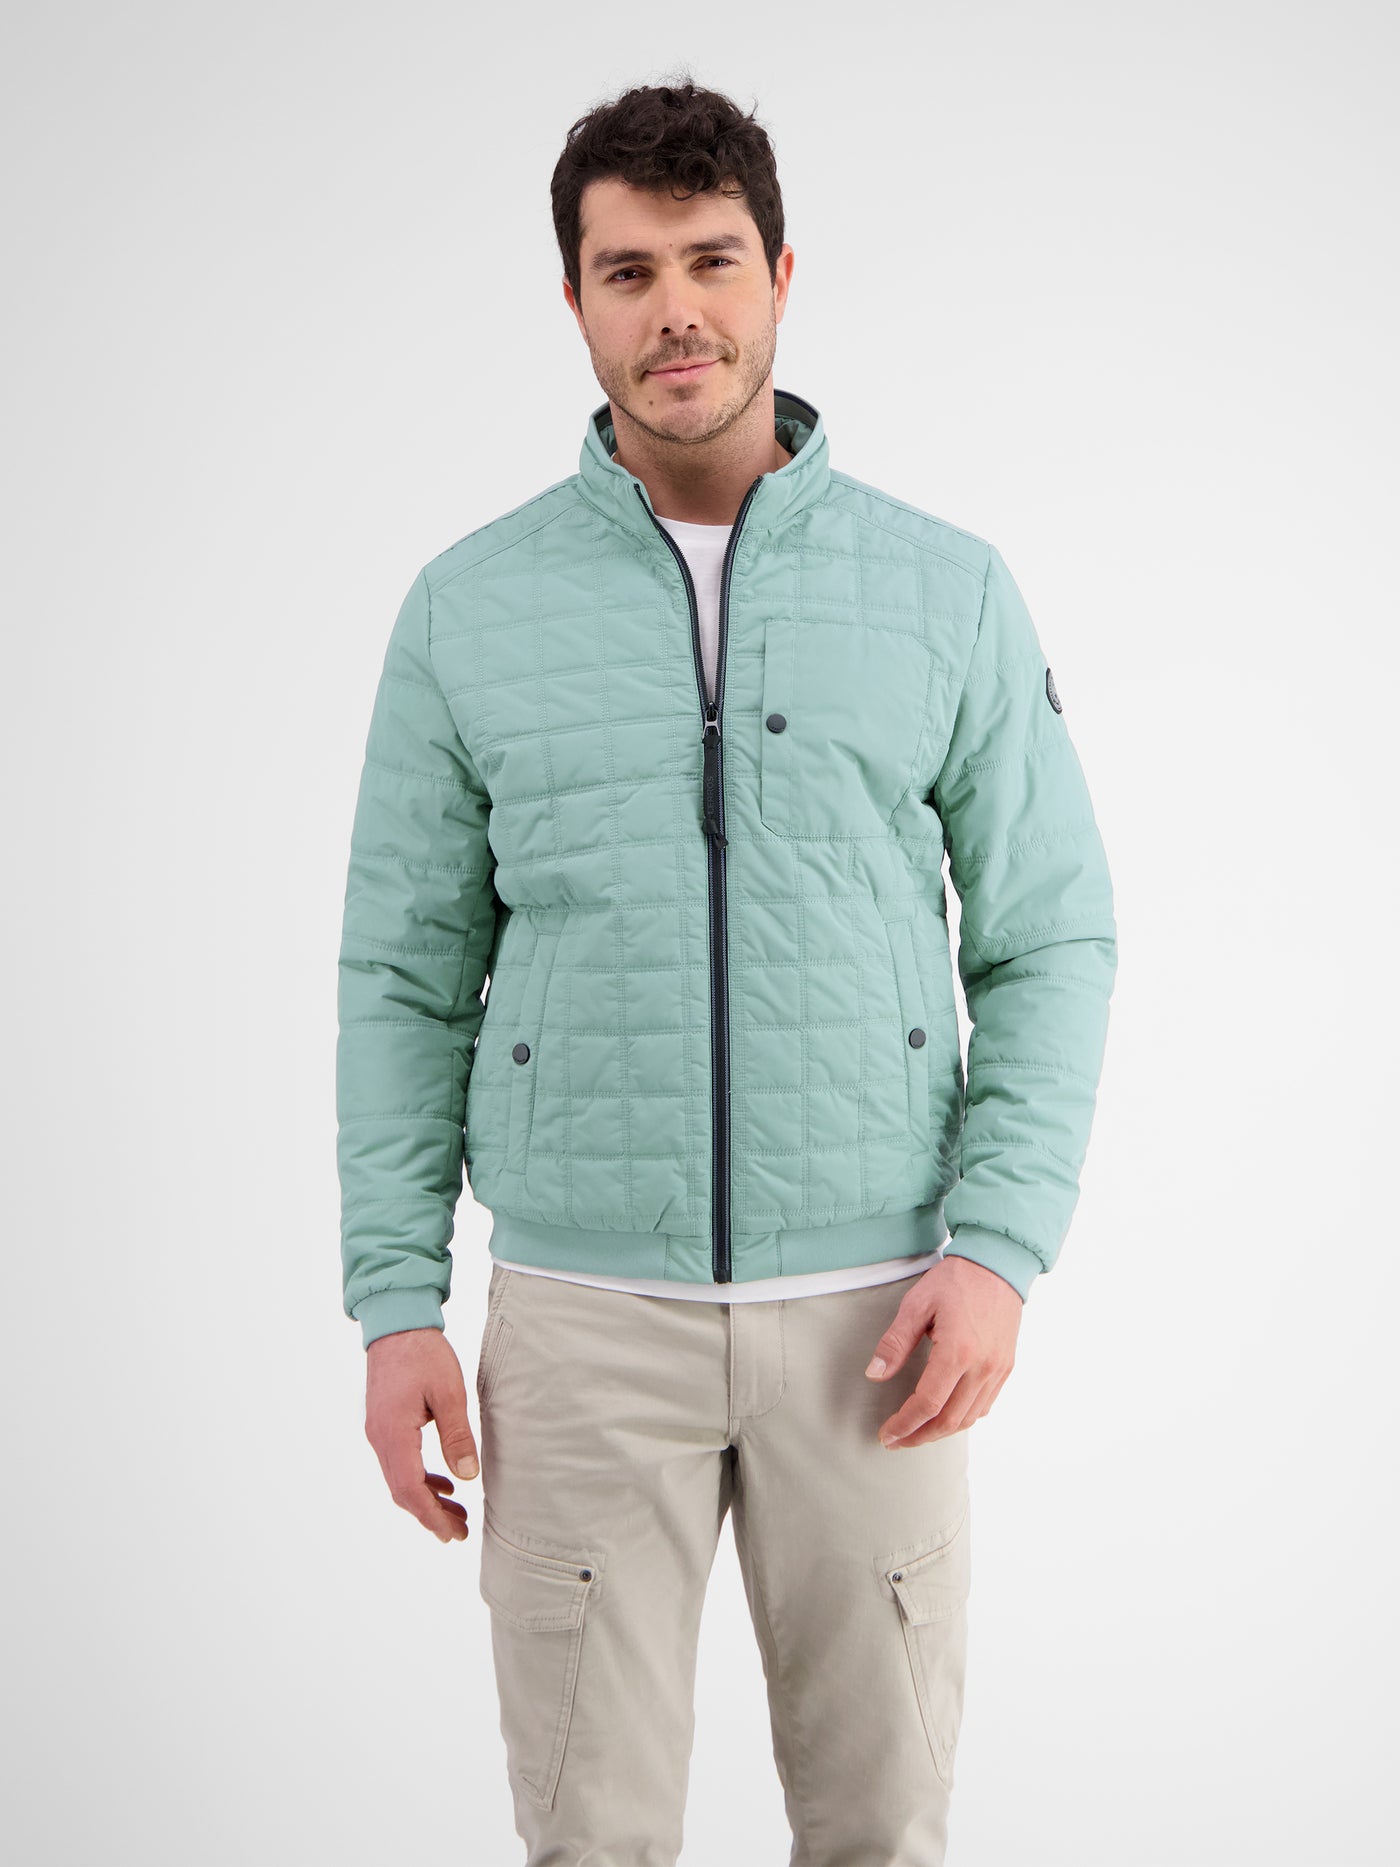 Sporty men's quilted jacket, breathable and water and wind resistant